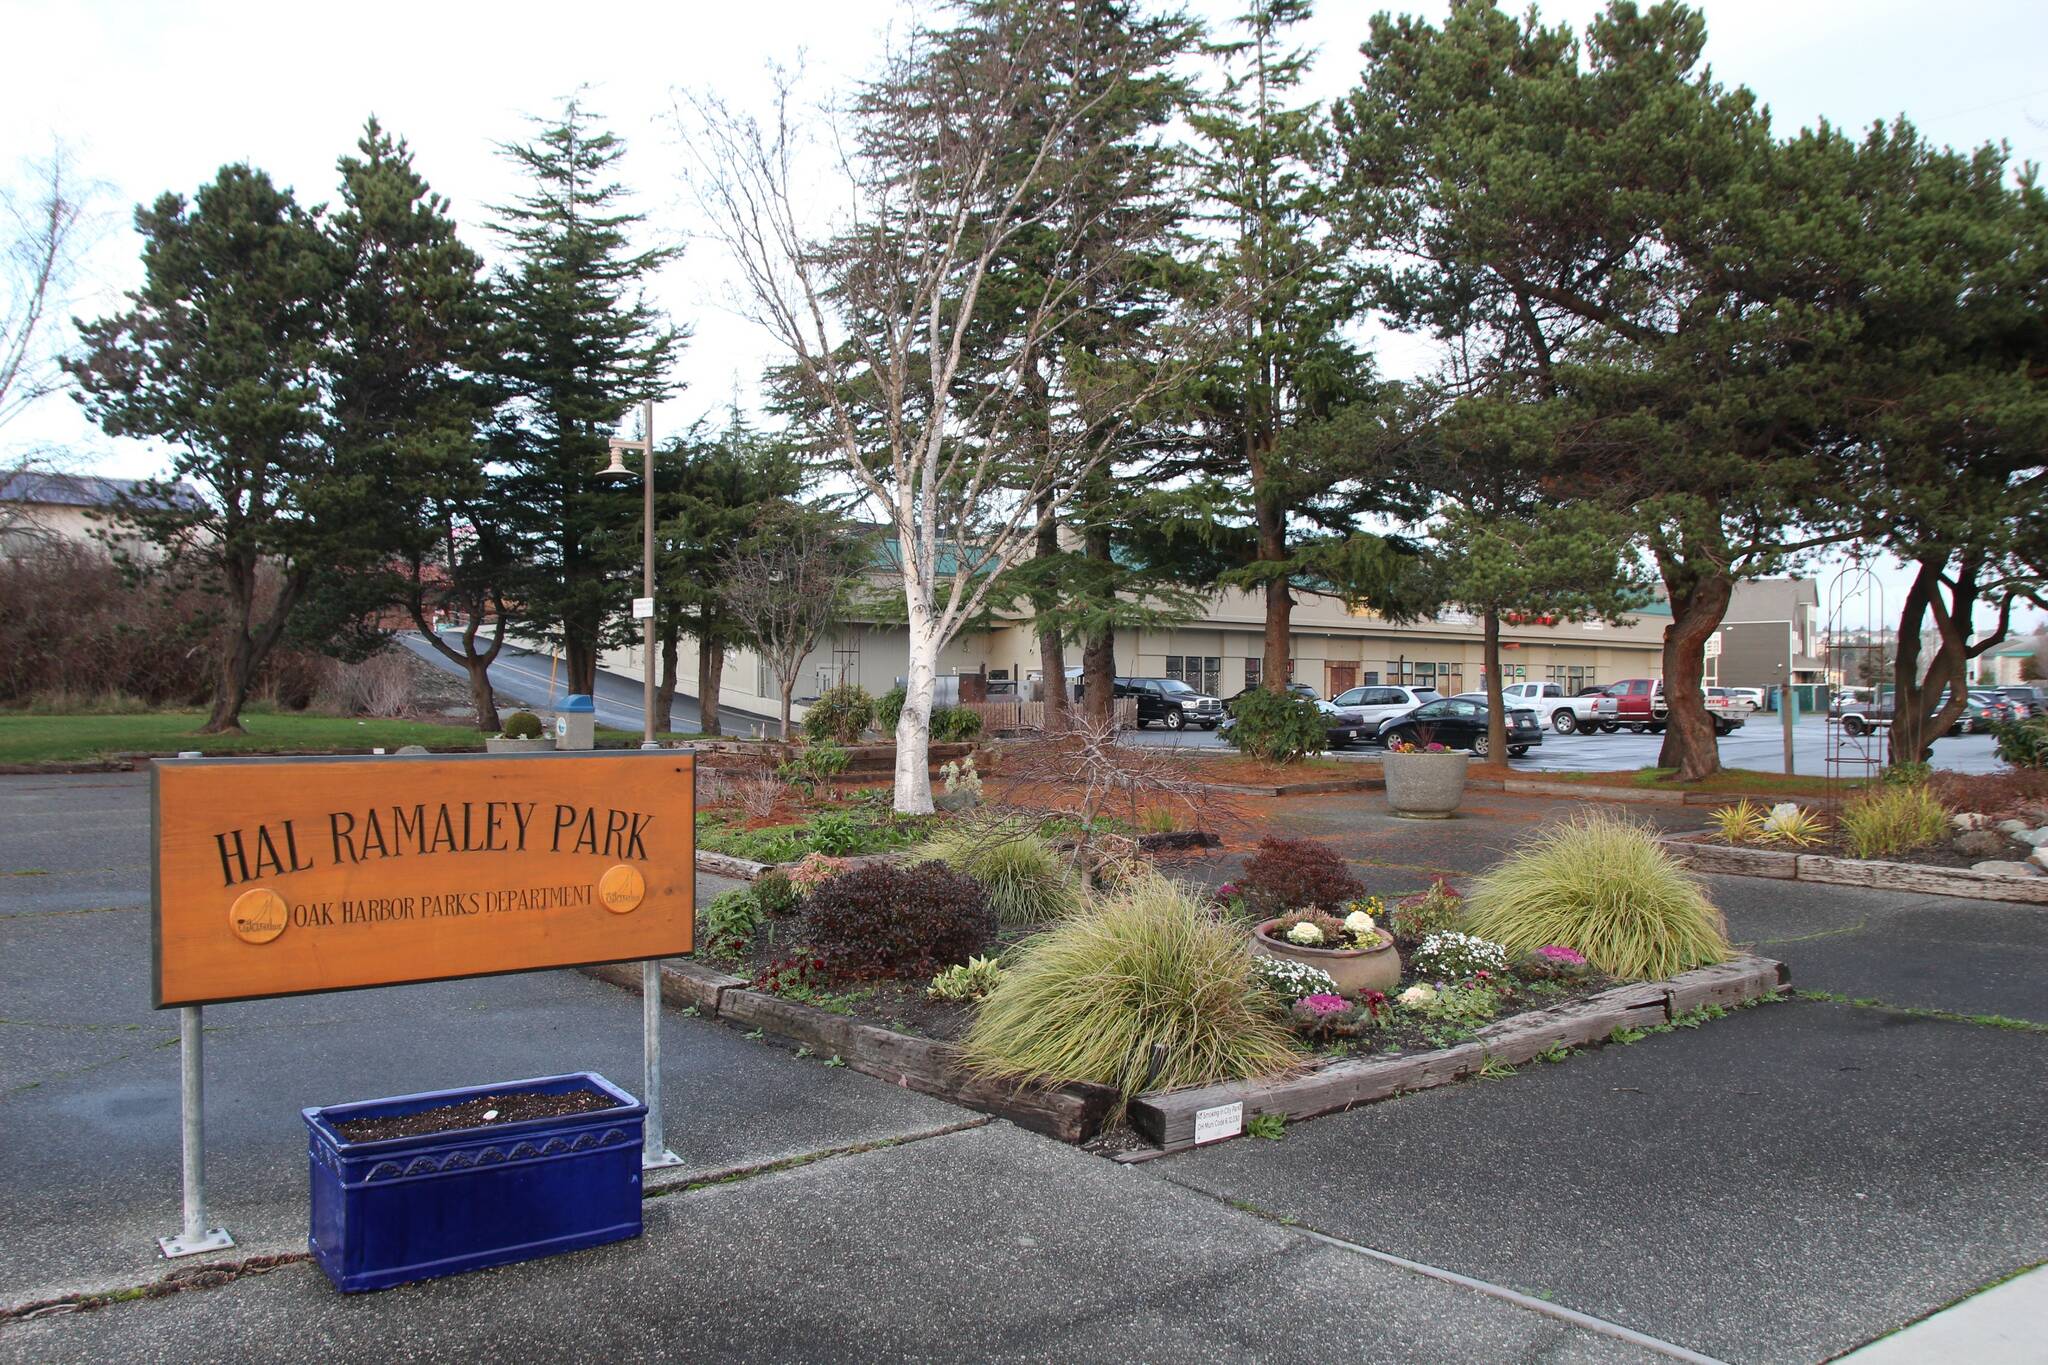 Hal Ramaley Park in Oak Harbor might see some improvements thanks to a grant the city is applying for. (Photo by Luisa Loi)